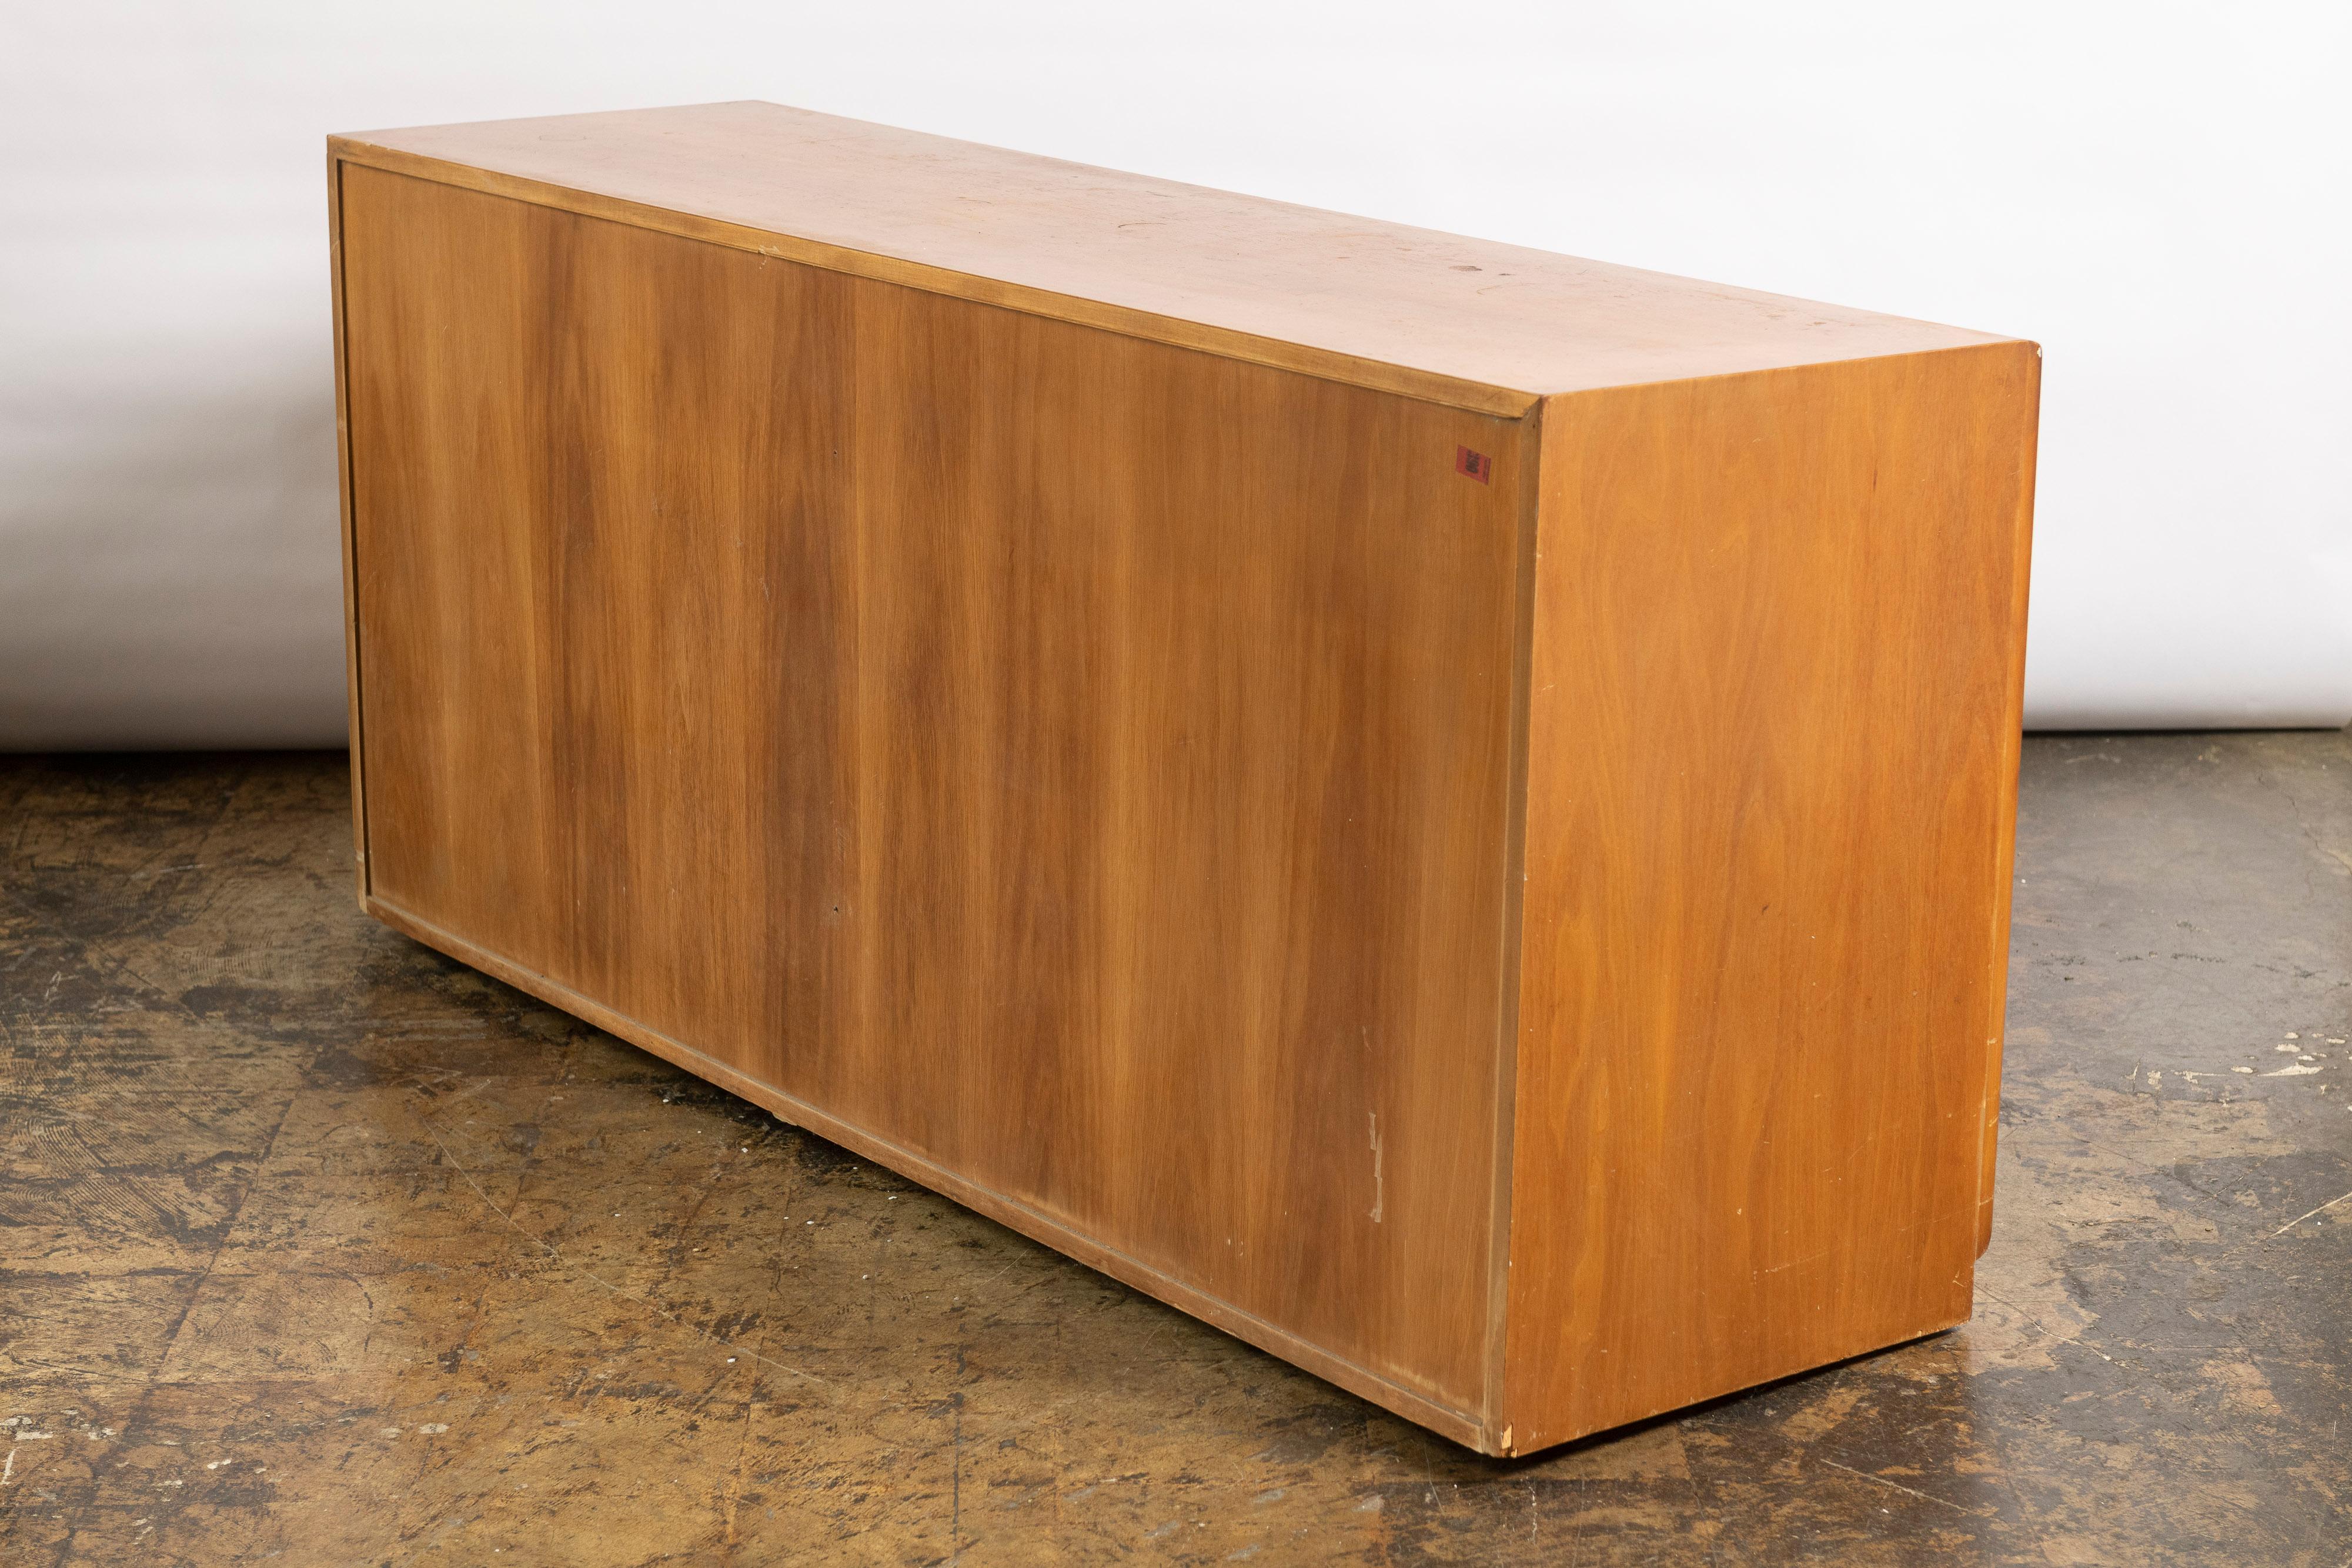 Great six drawer double dresser/credenza designed by T.H. Robsjohn Gibbings for Widdicomb Furniture in teak. The chest features two banks of three drawers, including dividers in a couple drawers, providing generous, organized storage space. The